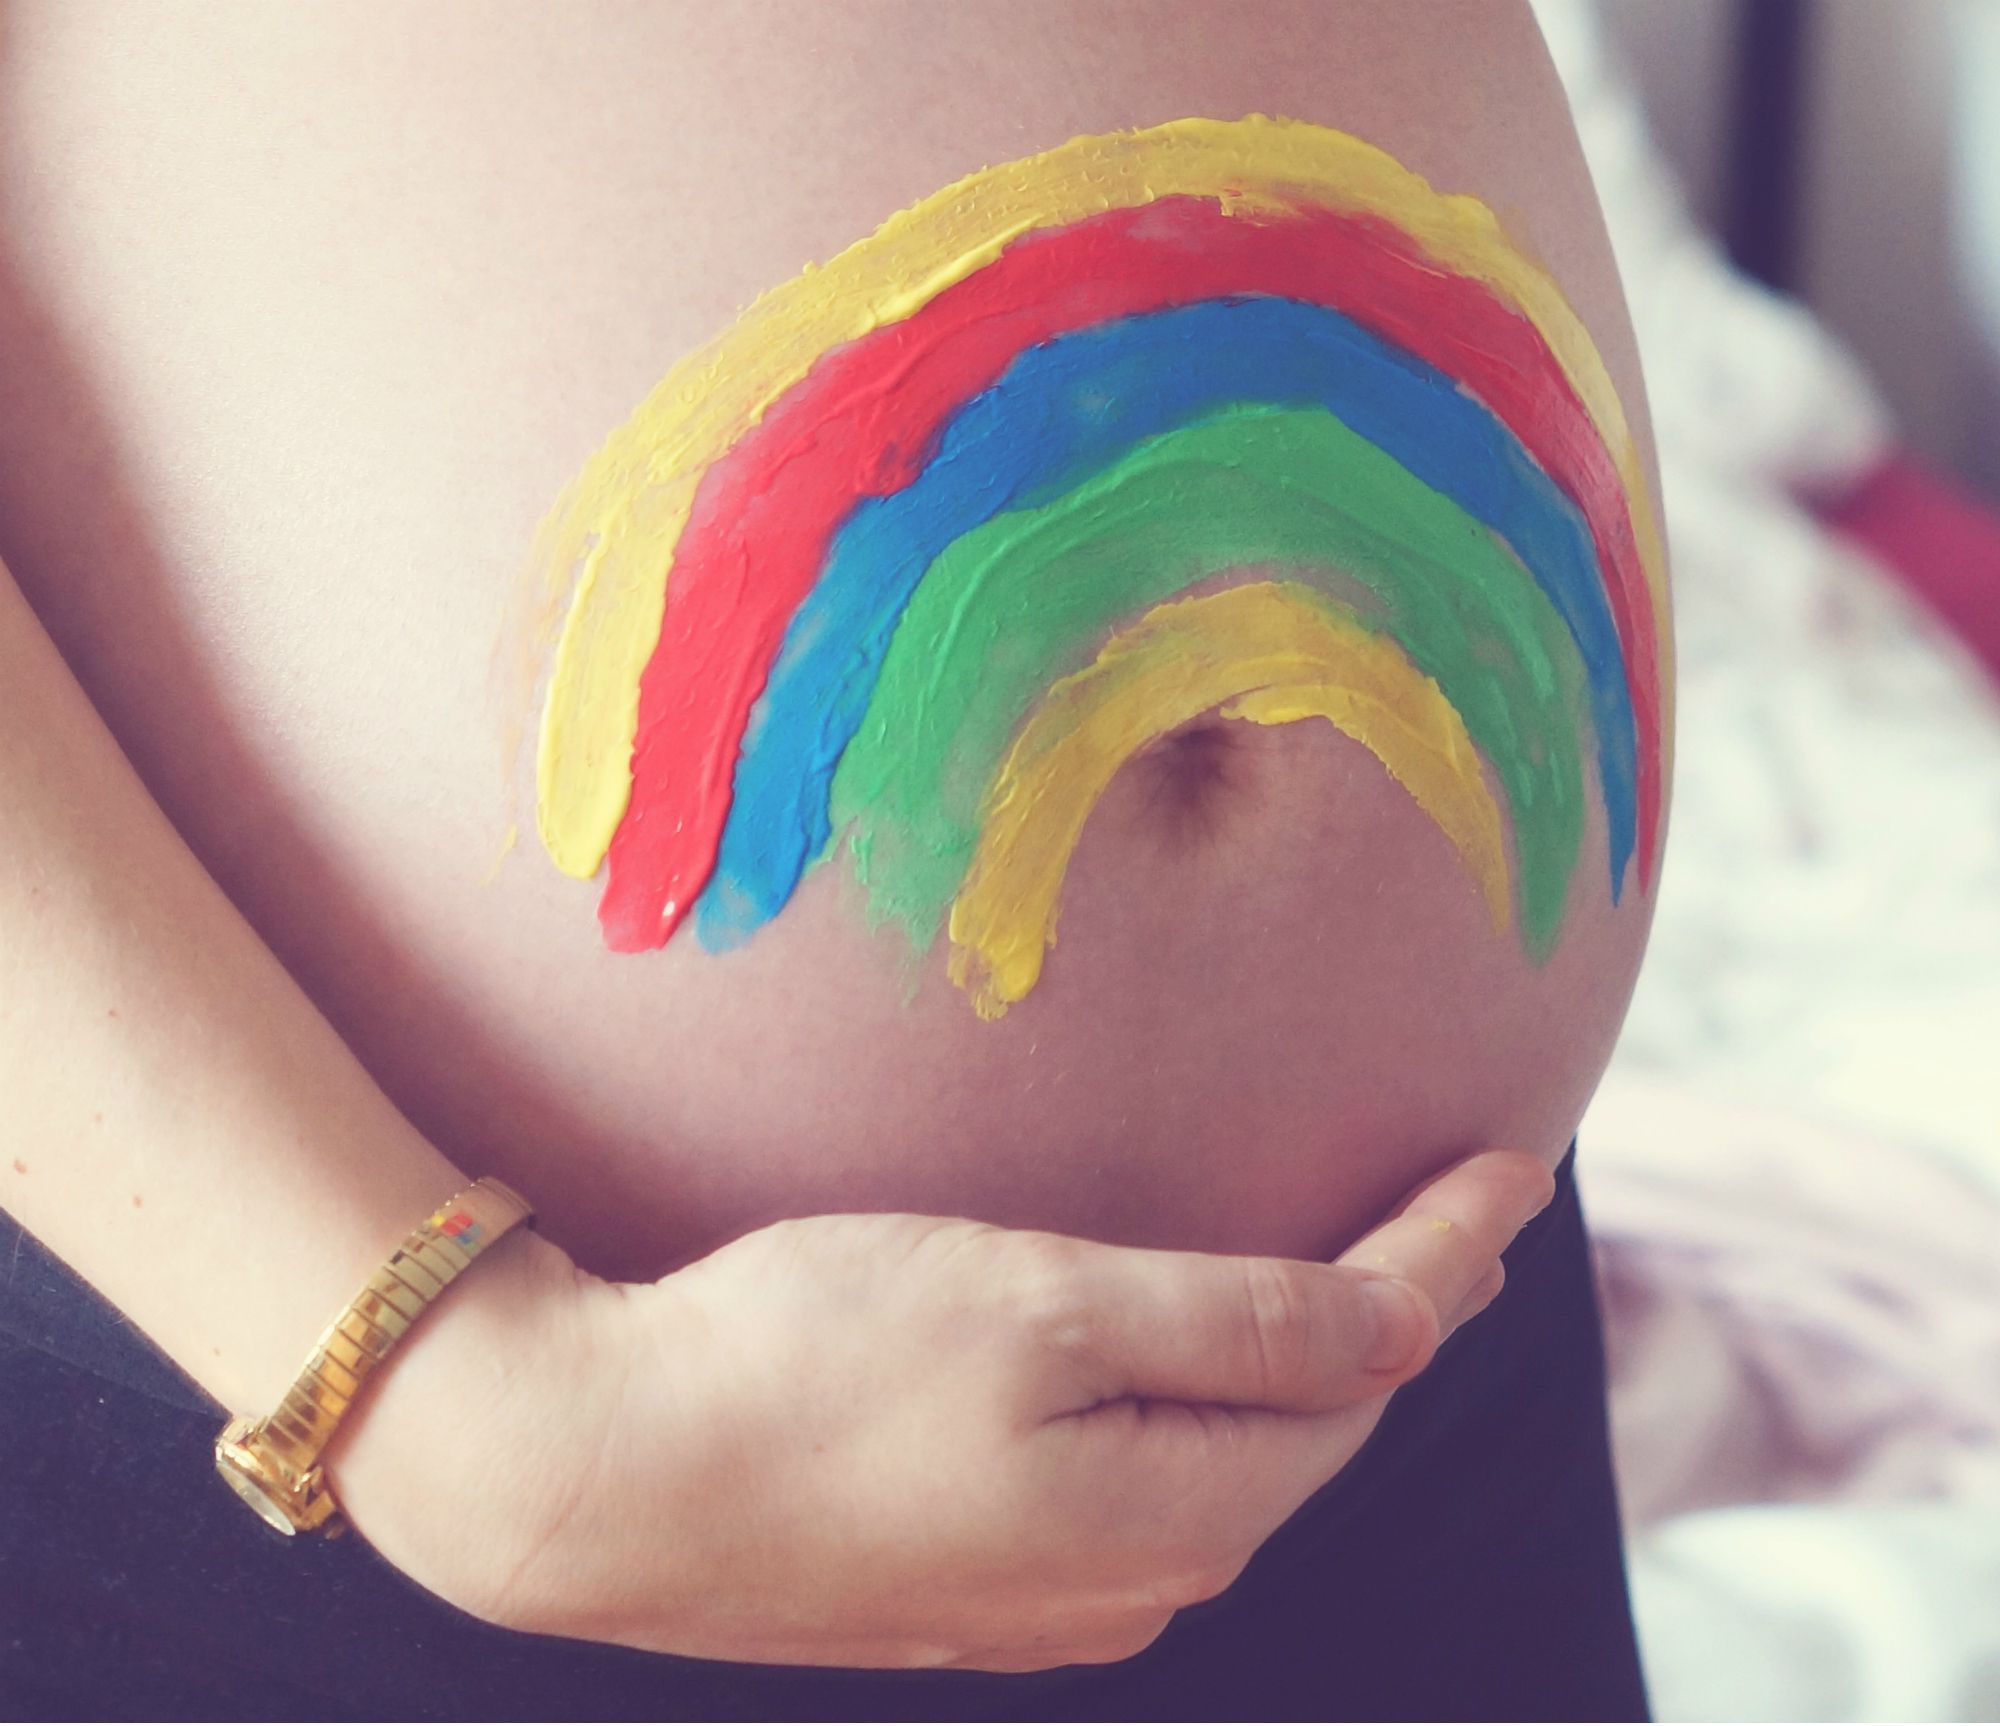 Rainbow Baby or Pregnancy After Miscarriage